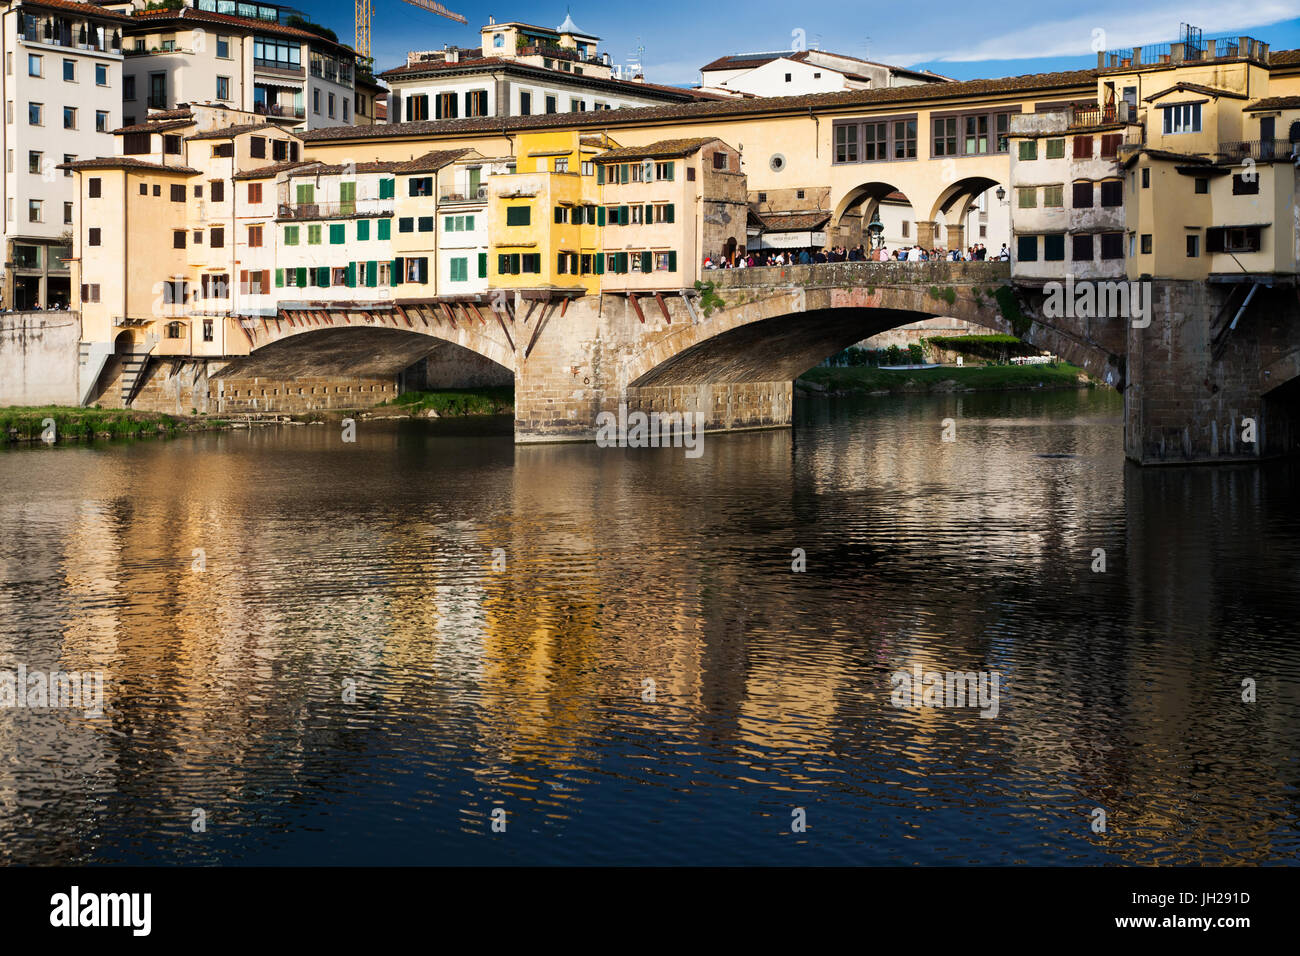 Ponte Vecchio reflected in the Arno River, Florence, UNESCO World Heritage Site, Tuscany, Italy, Europe Stock Photo